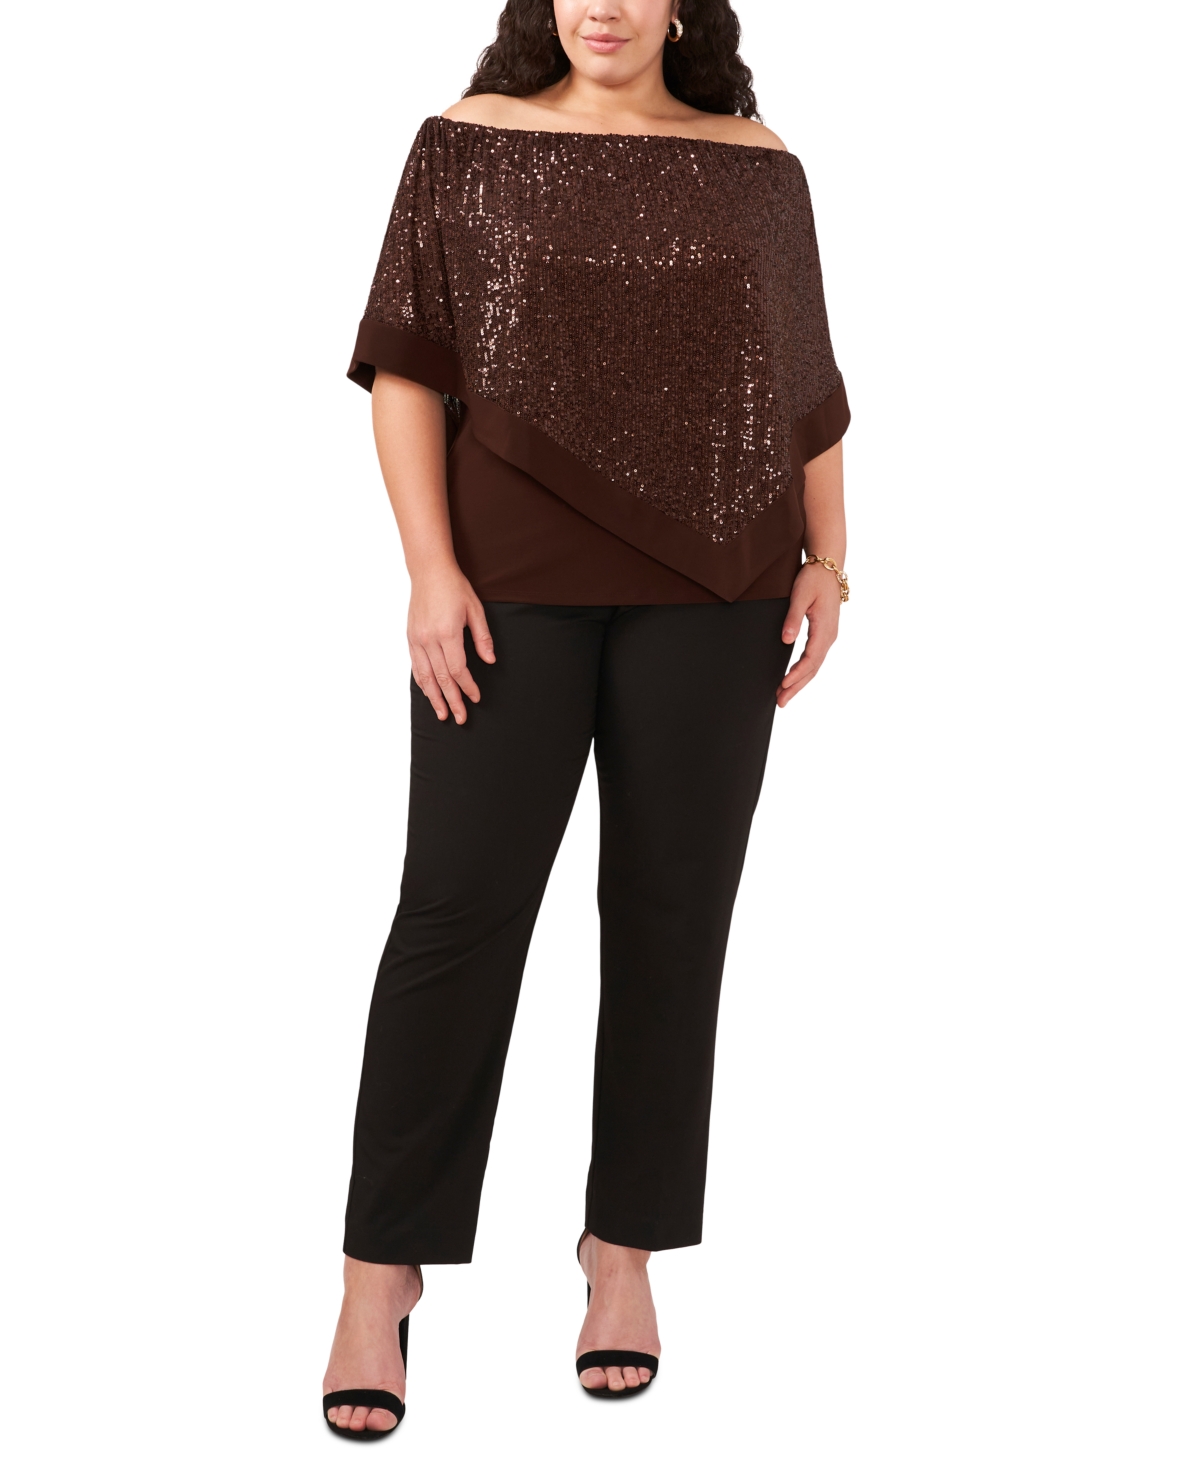 Msk Plus Size Sequined Cape Off-the-shoulder Top In Chocolate